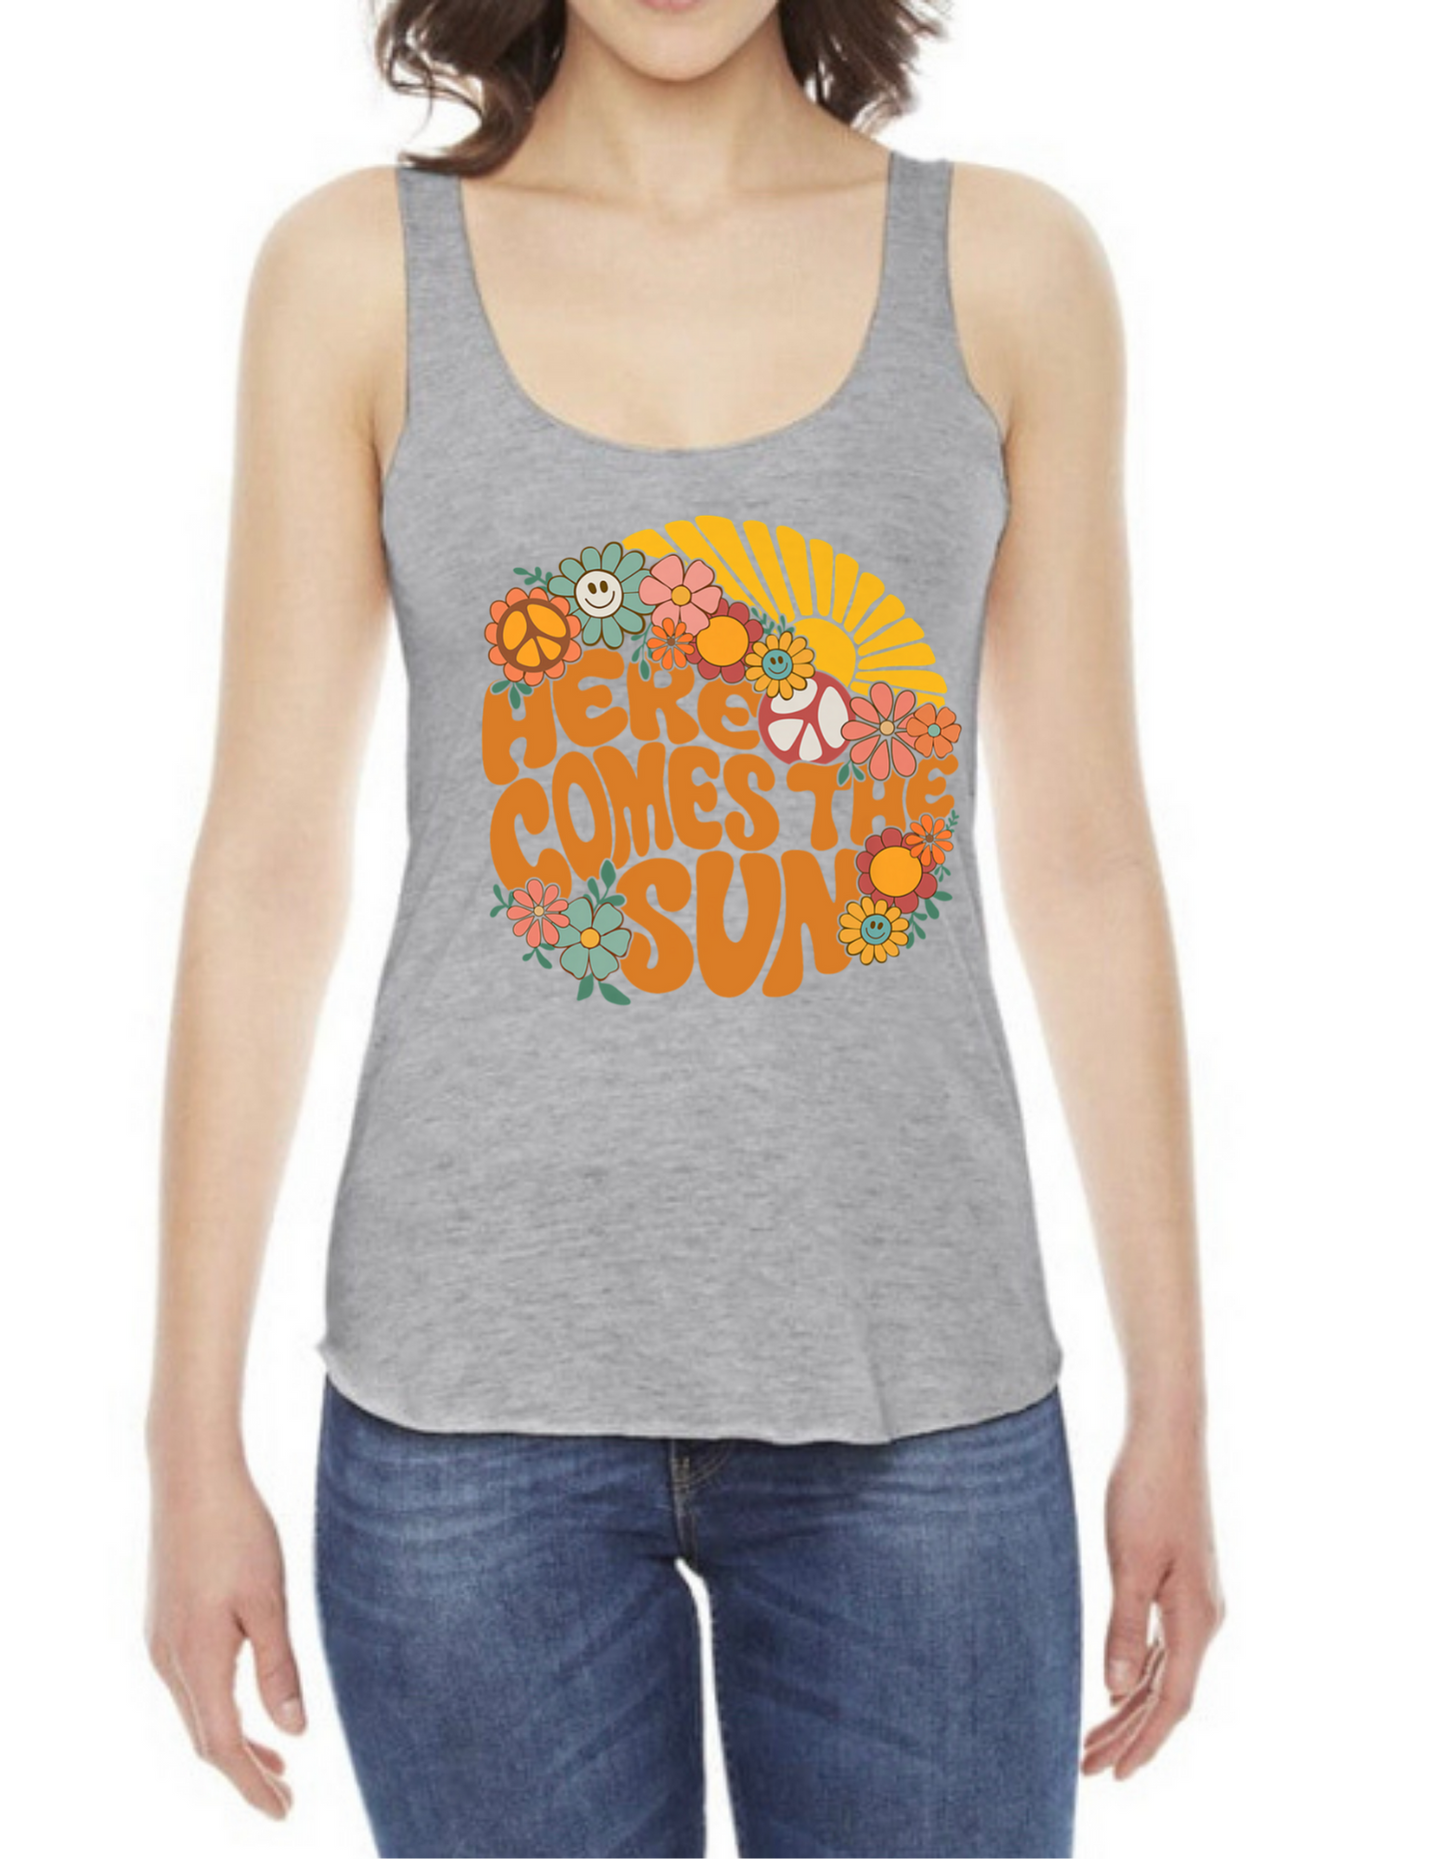 Here Comes the Sun Racer Back Tank Top